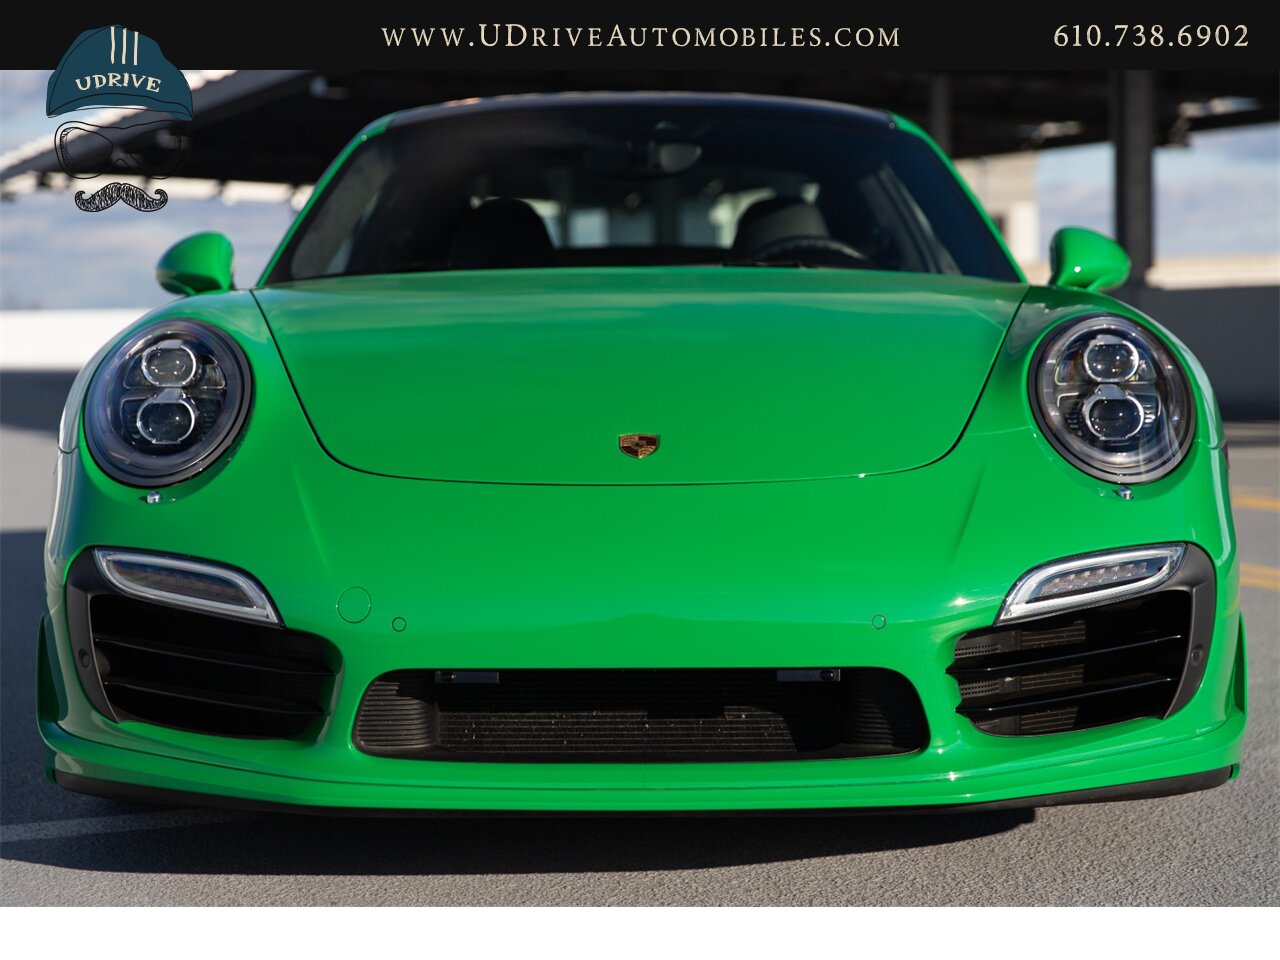 2016 Porsche 911 Turbo S PTS Viper Green Aerokit $203k MSRP  Painted Side Skirts Painted Grilles Wheels in Black - Photo 11 - West Chester, PA 19382